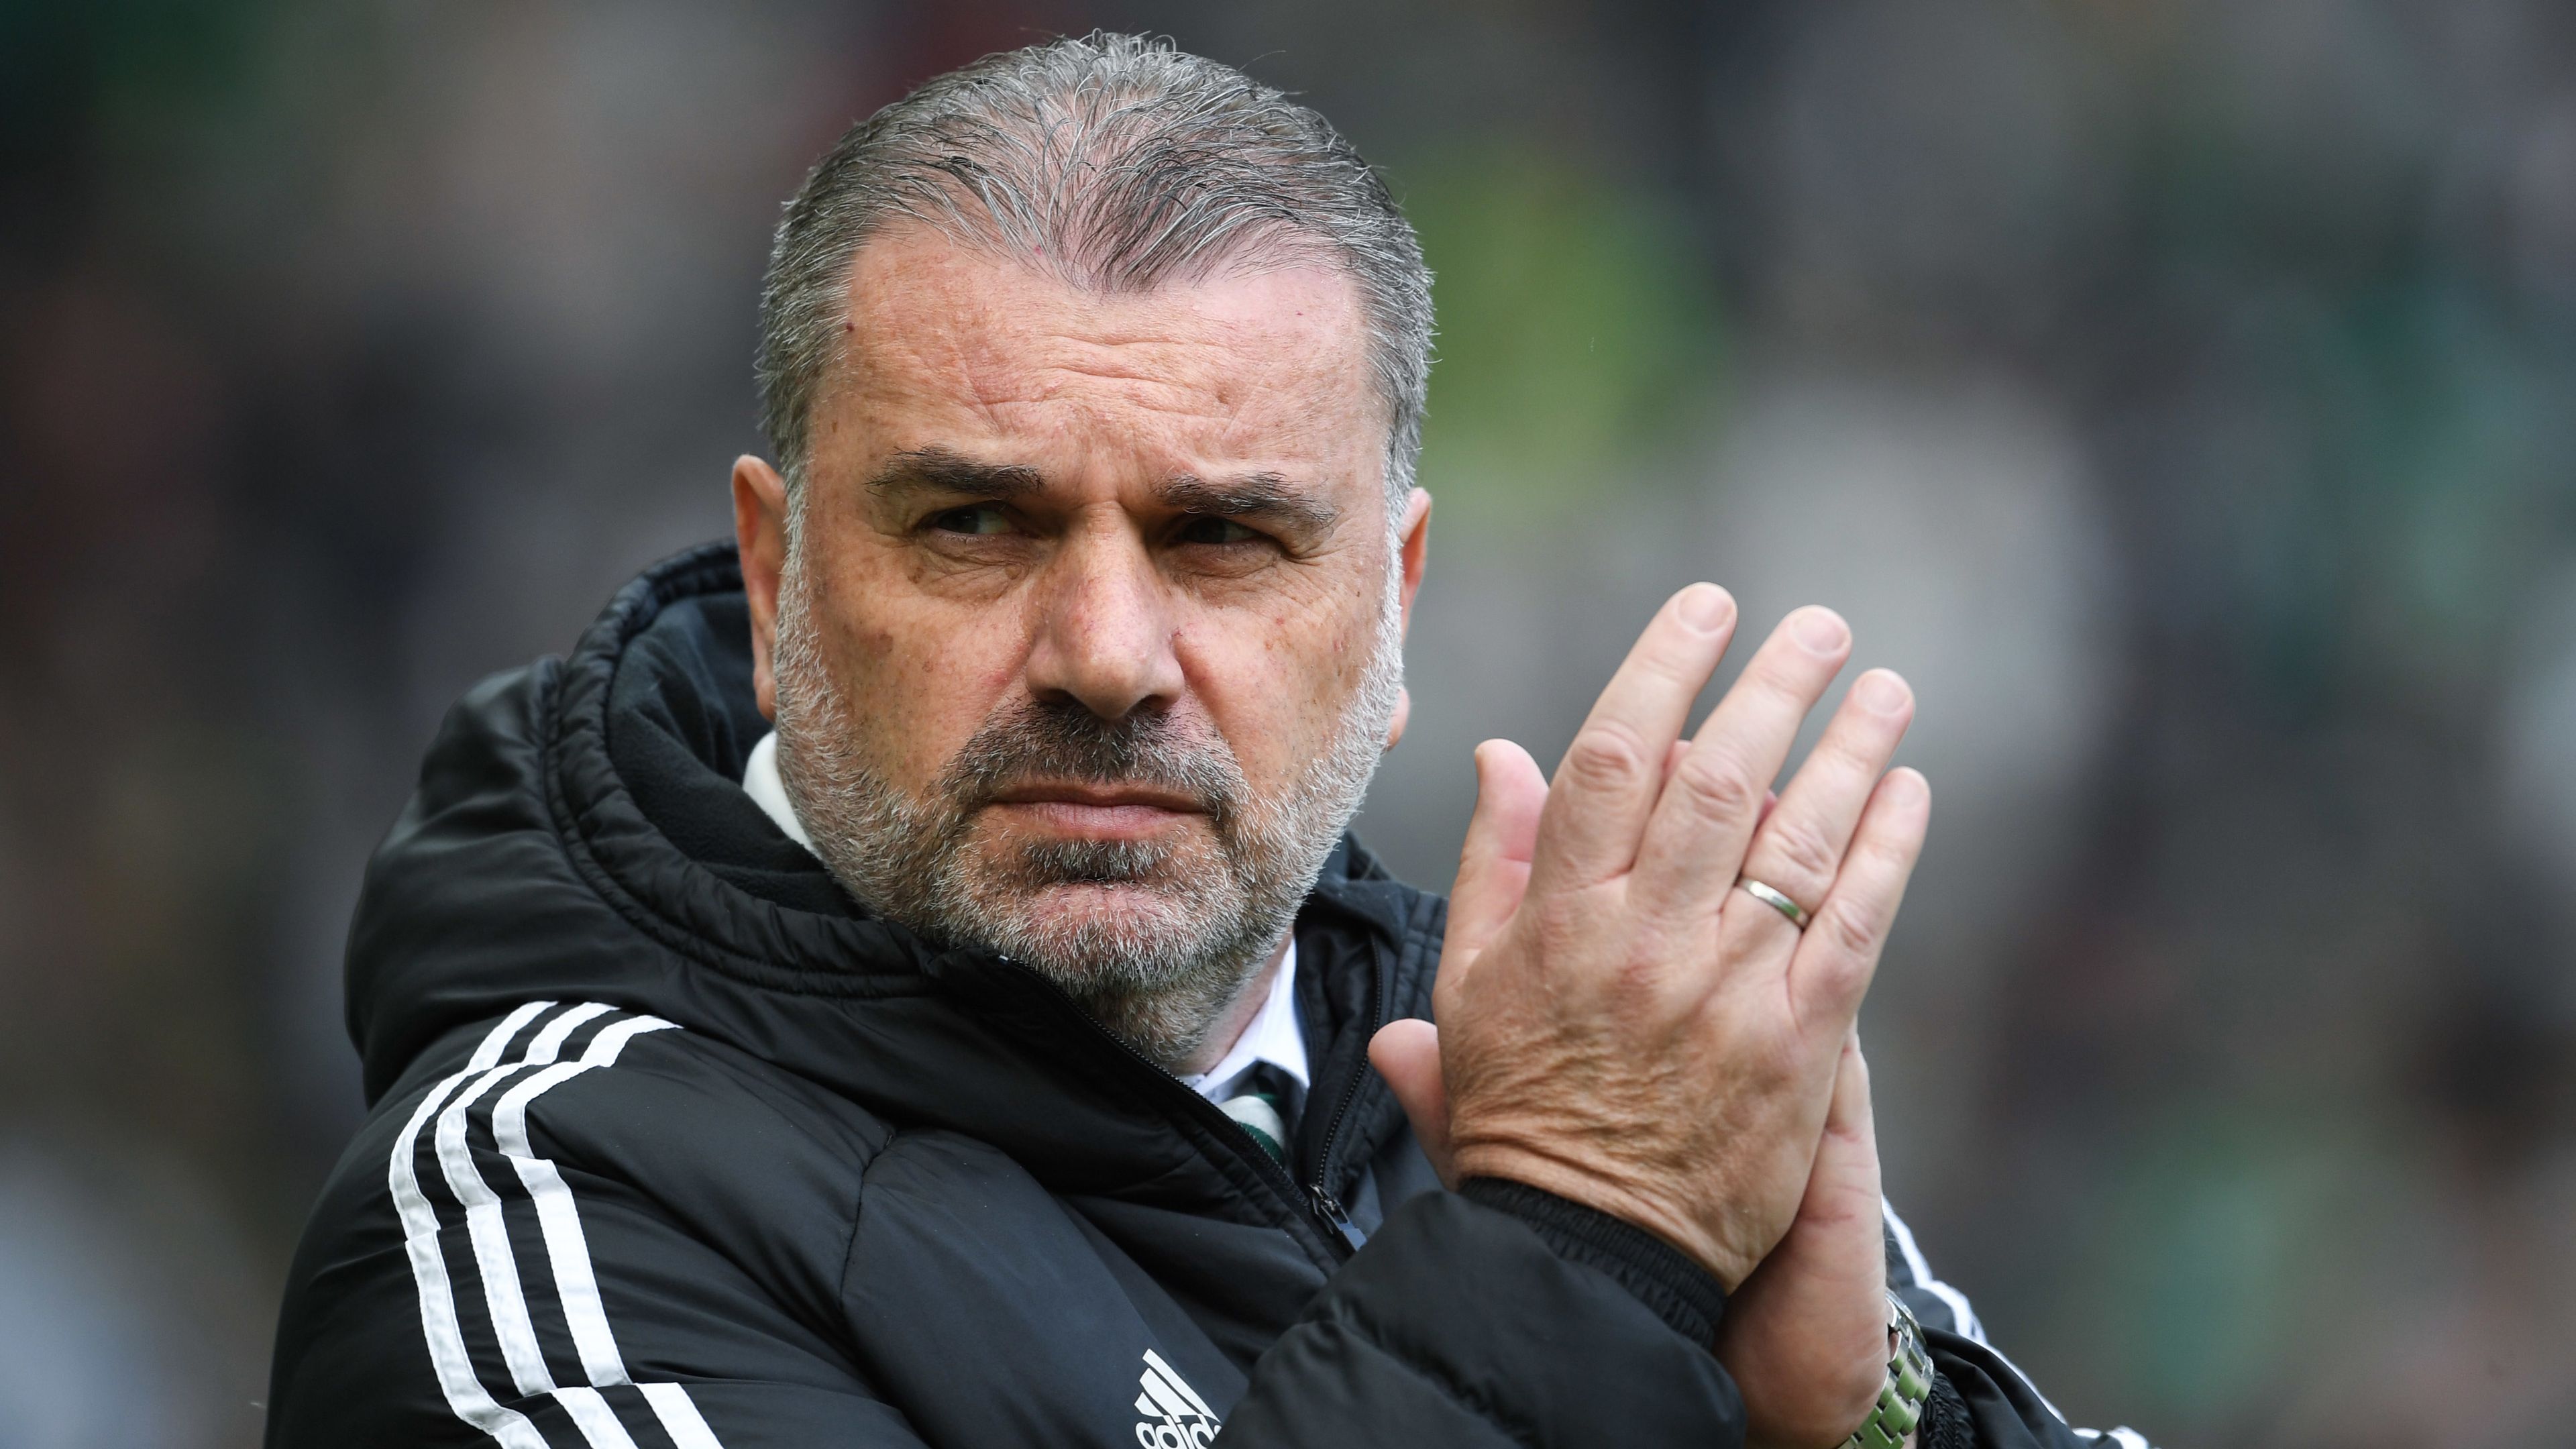 Ange Postecoglou revealed as third candidate on shortlist for Chelsea manager role